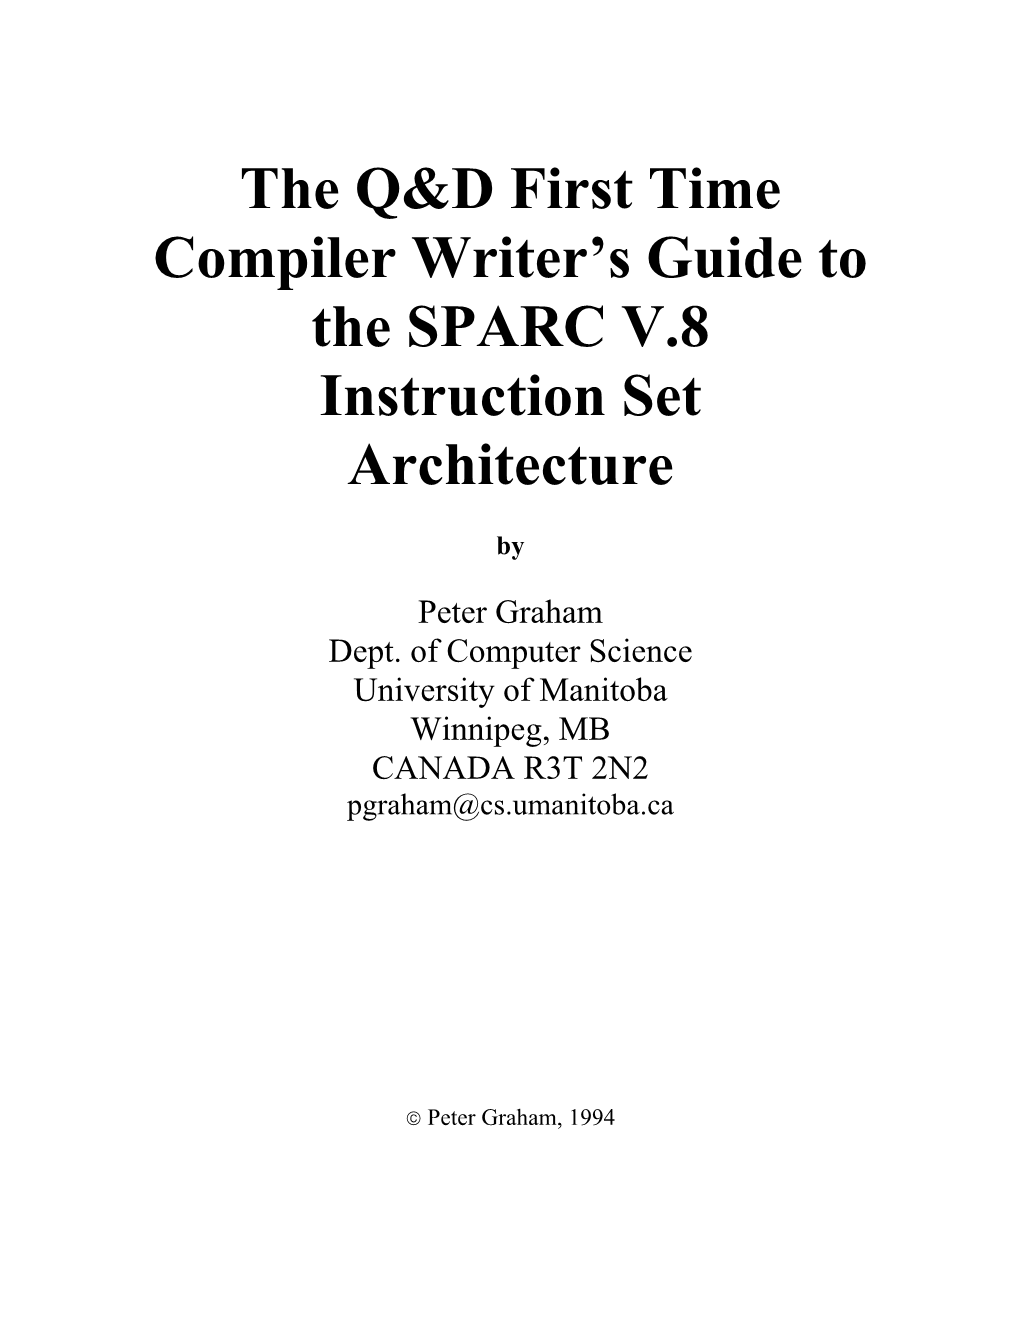 First Time Compiler Writer's Guide to the SPARC V.8 Instruction Set